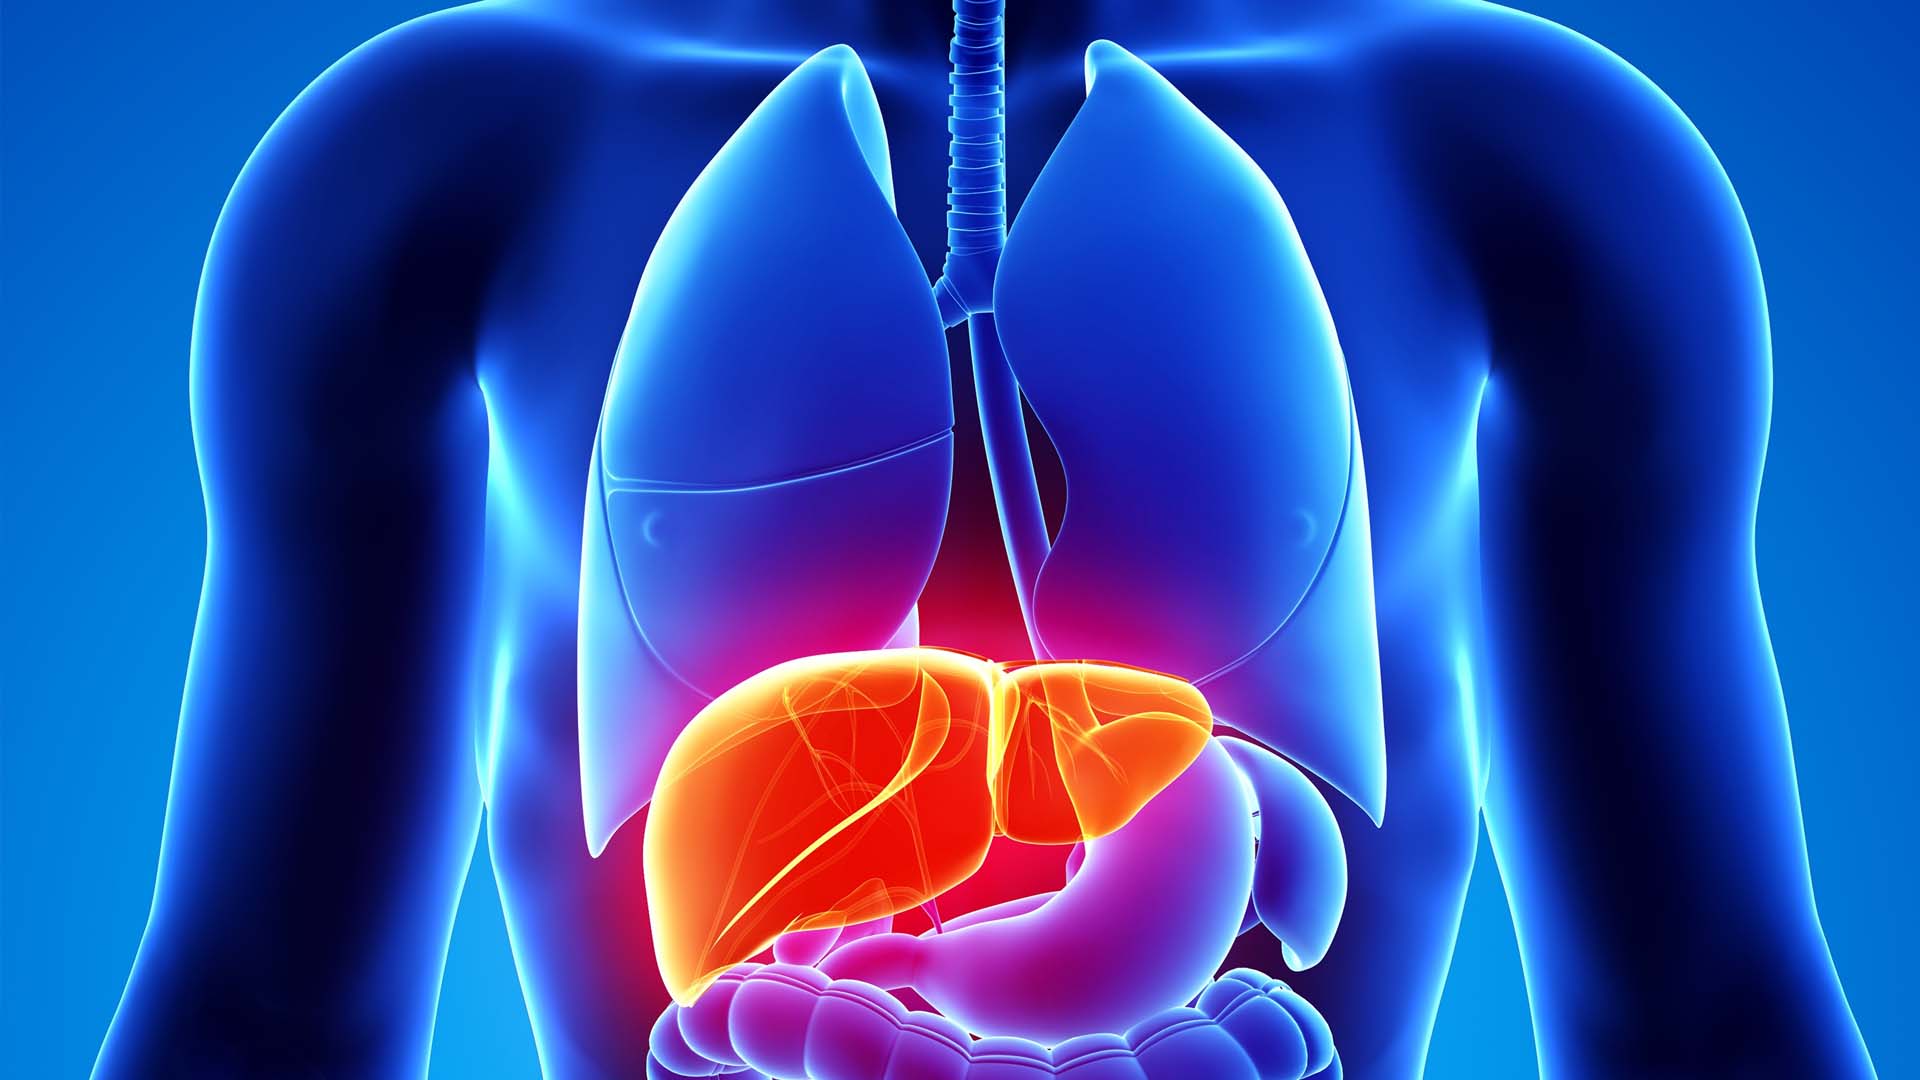 Mapping the Link Between Liver Function and Behavior